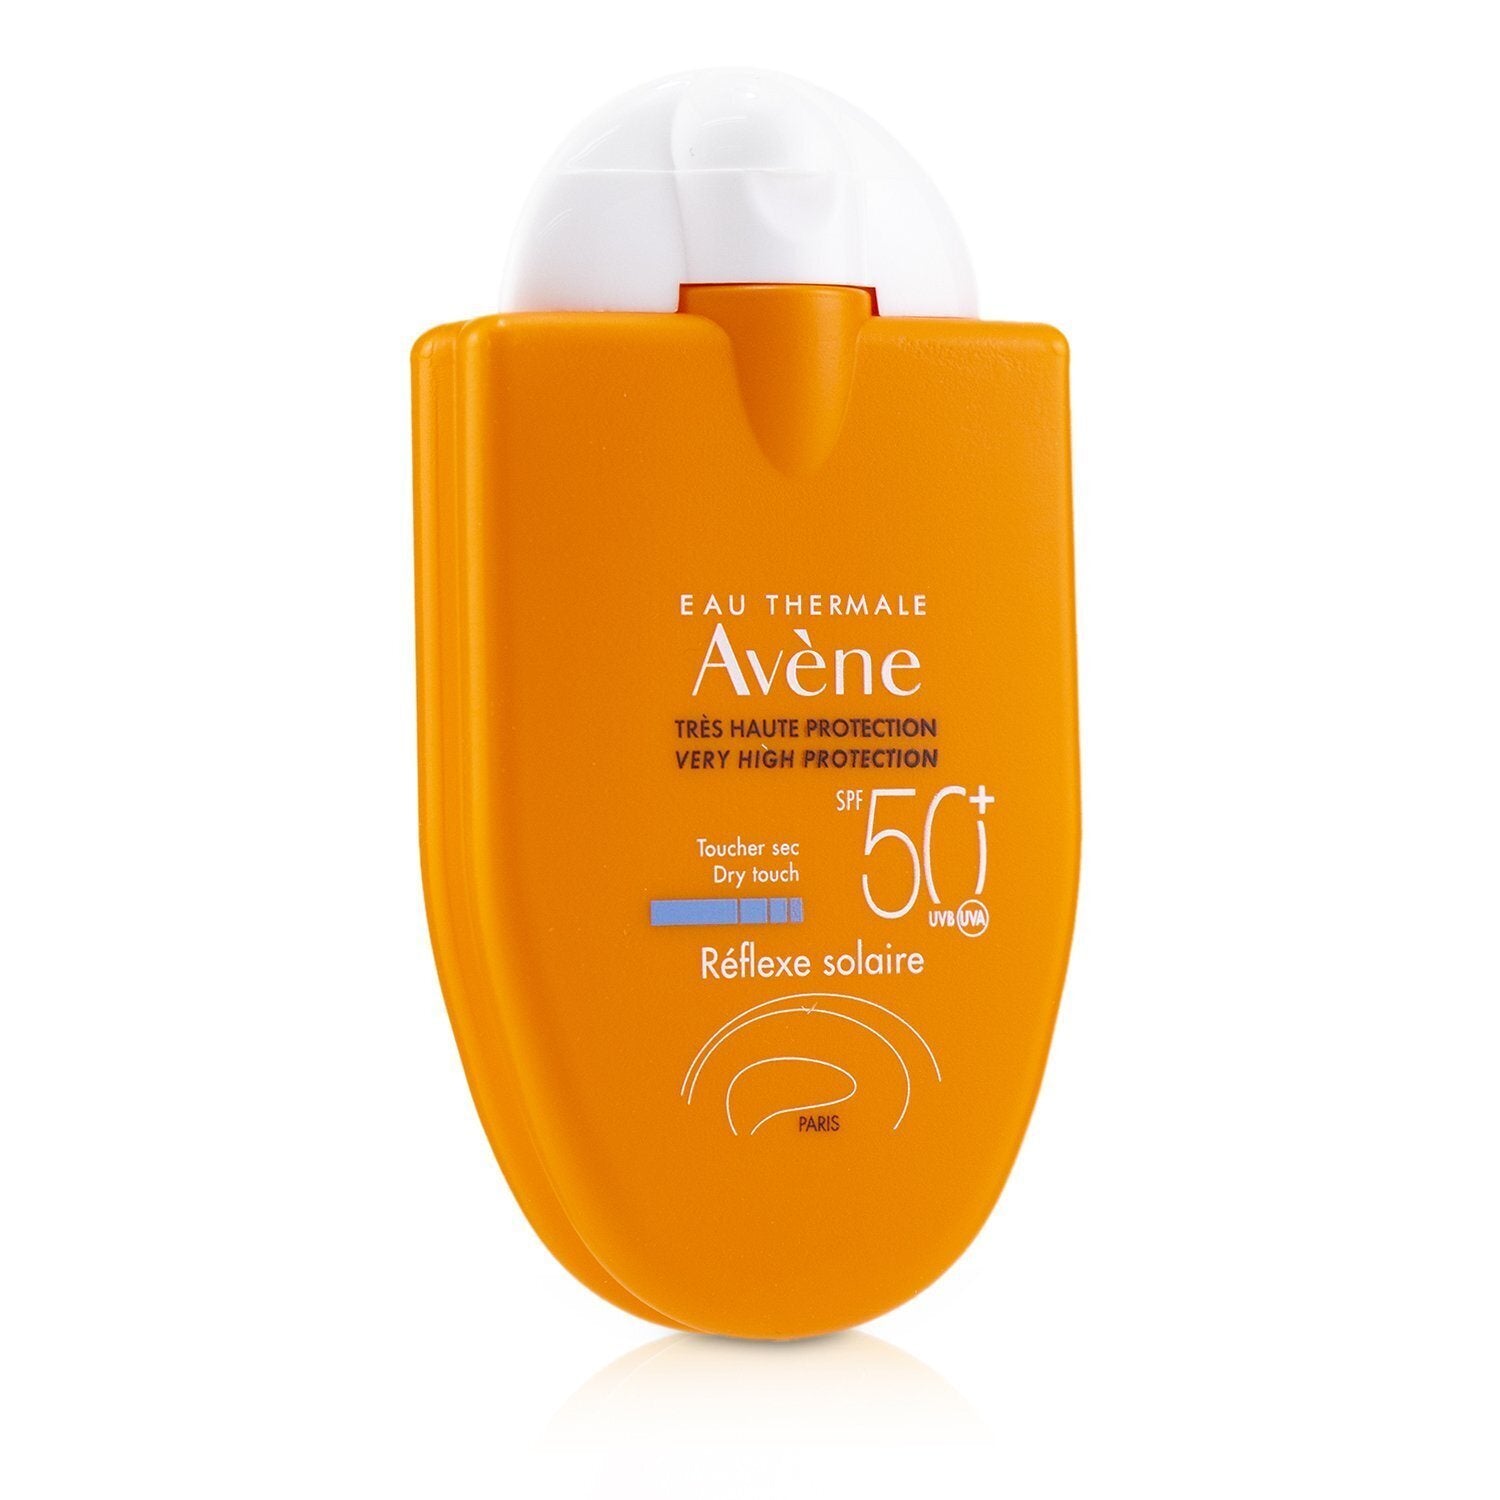 A bottle of AVENE - Reflexe Solaire SPF 50 For Sensitive Skin (Exp. Date: 06/2023) 30ml/1oz sunscreen, with a white cap and orange body, isolated on a white background.